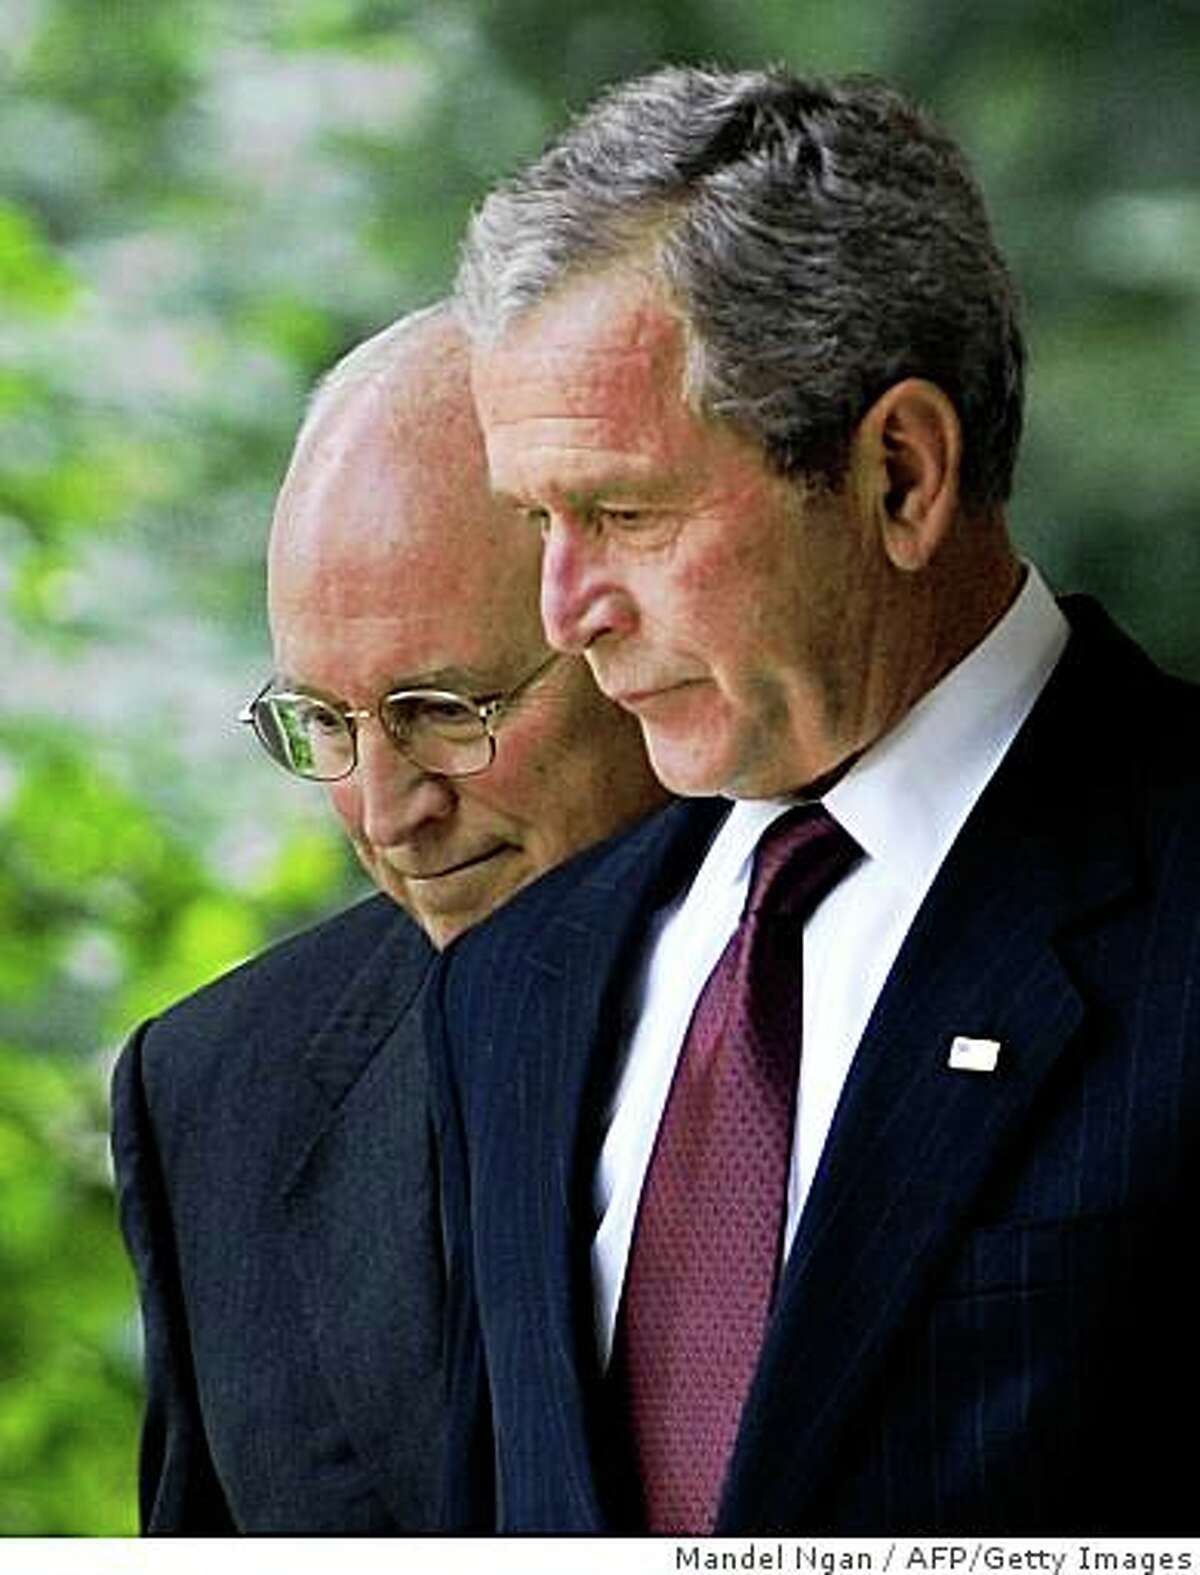 US President George W. Bush (R) and Vice President Dick Cheney walk to the Rose Garden on July 10, 2008 for Bush to sign H.R. 6304, the FISA Amendments Act of 2008, at the White House in Washington, DC. The bill would expand legal authority for electronic wiretaps by spy agencies and includes retroactive immunity for telecommunications firms which aided warrantless government surveillance operations following the September 11 attacks. AFP PHOTO/Mandel NGAN (Photo credit should read MANDEL NGAN/AFP/Getty Images)